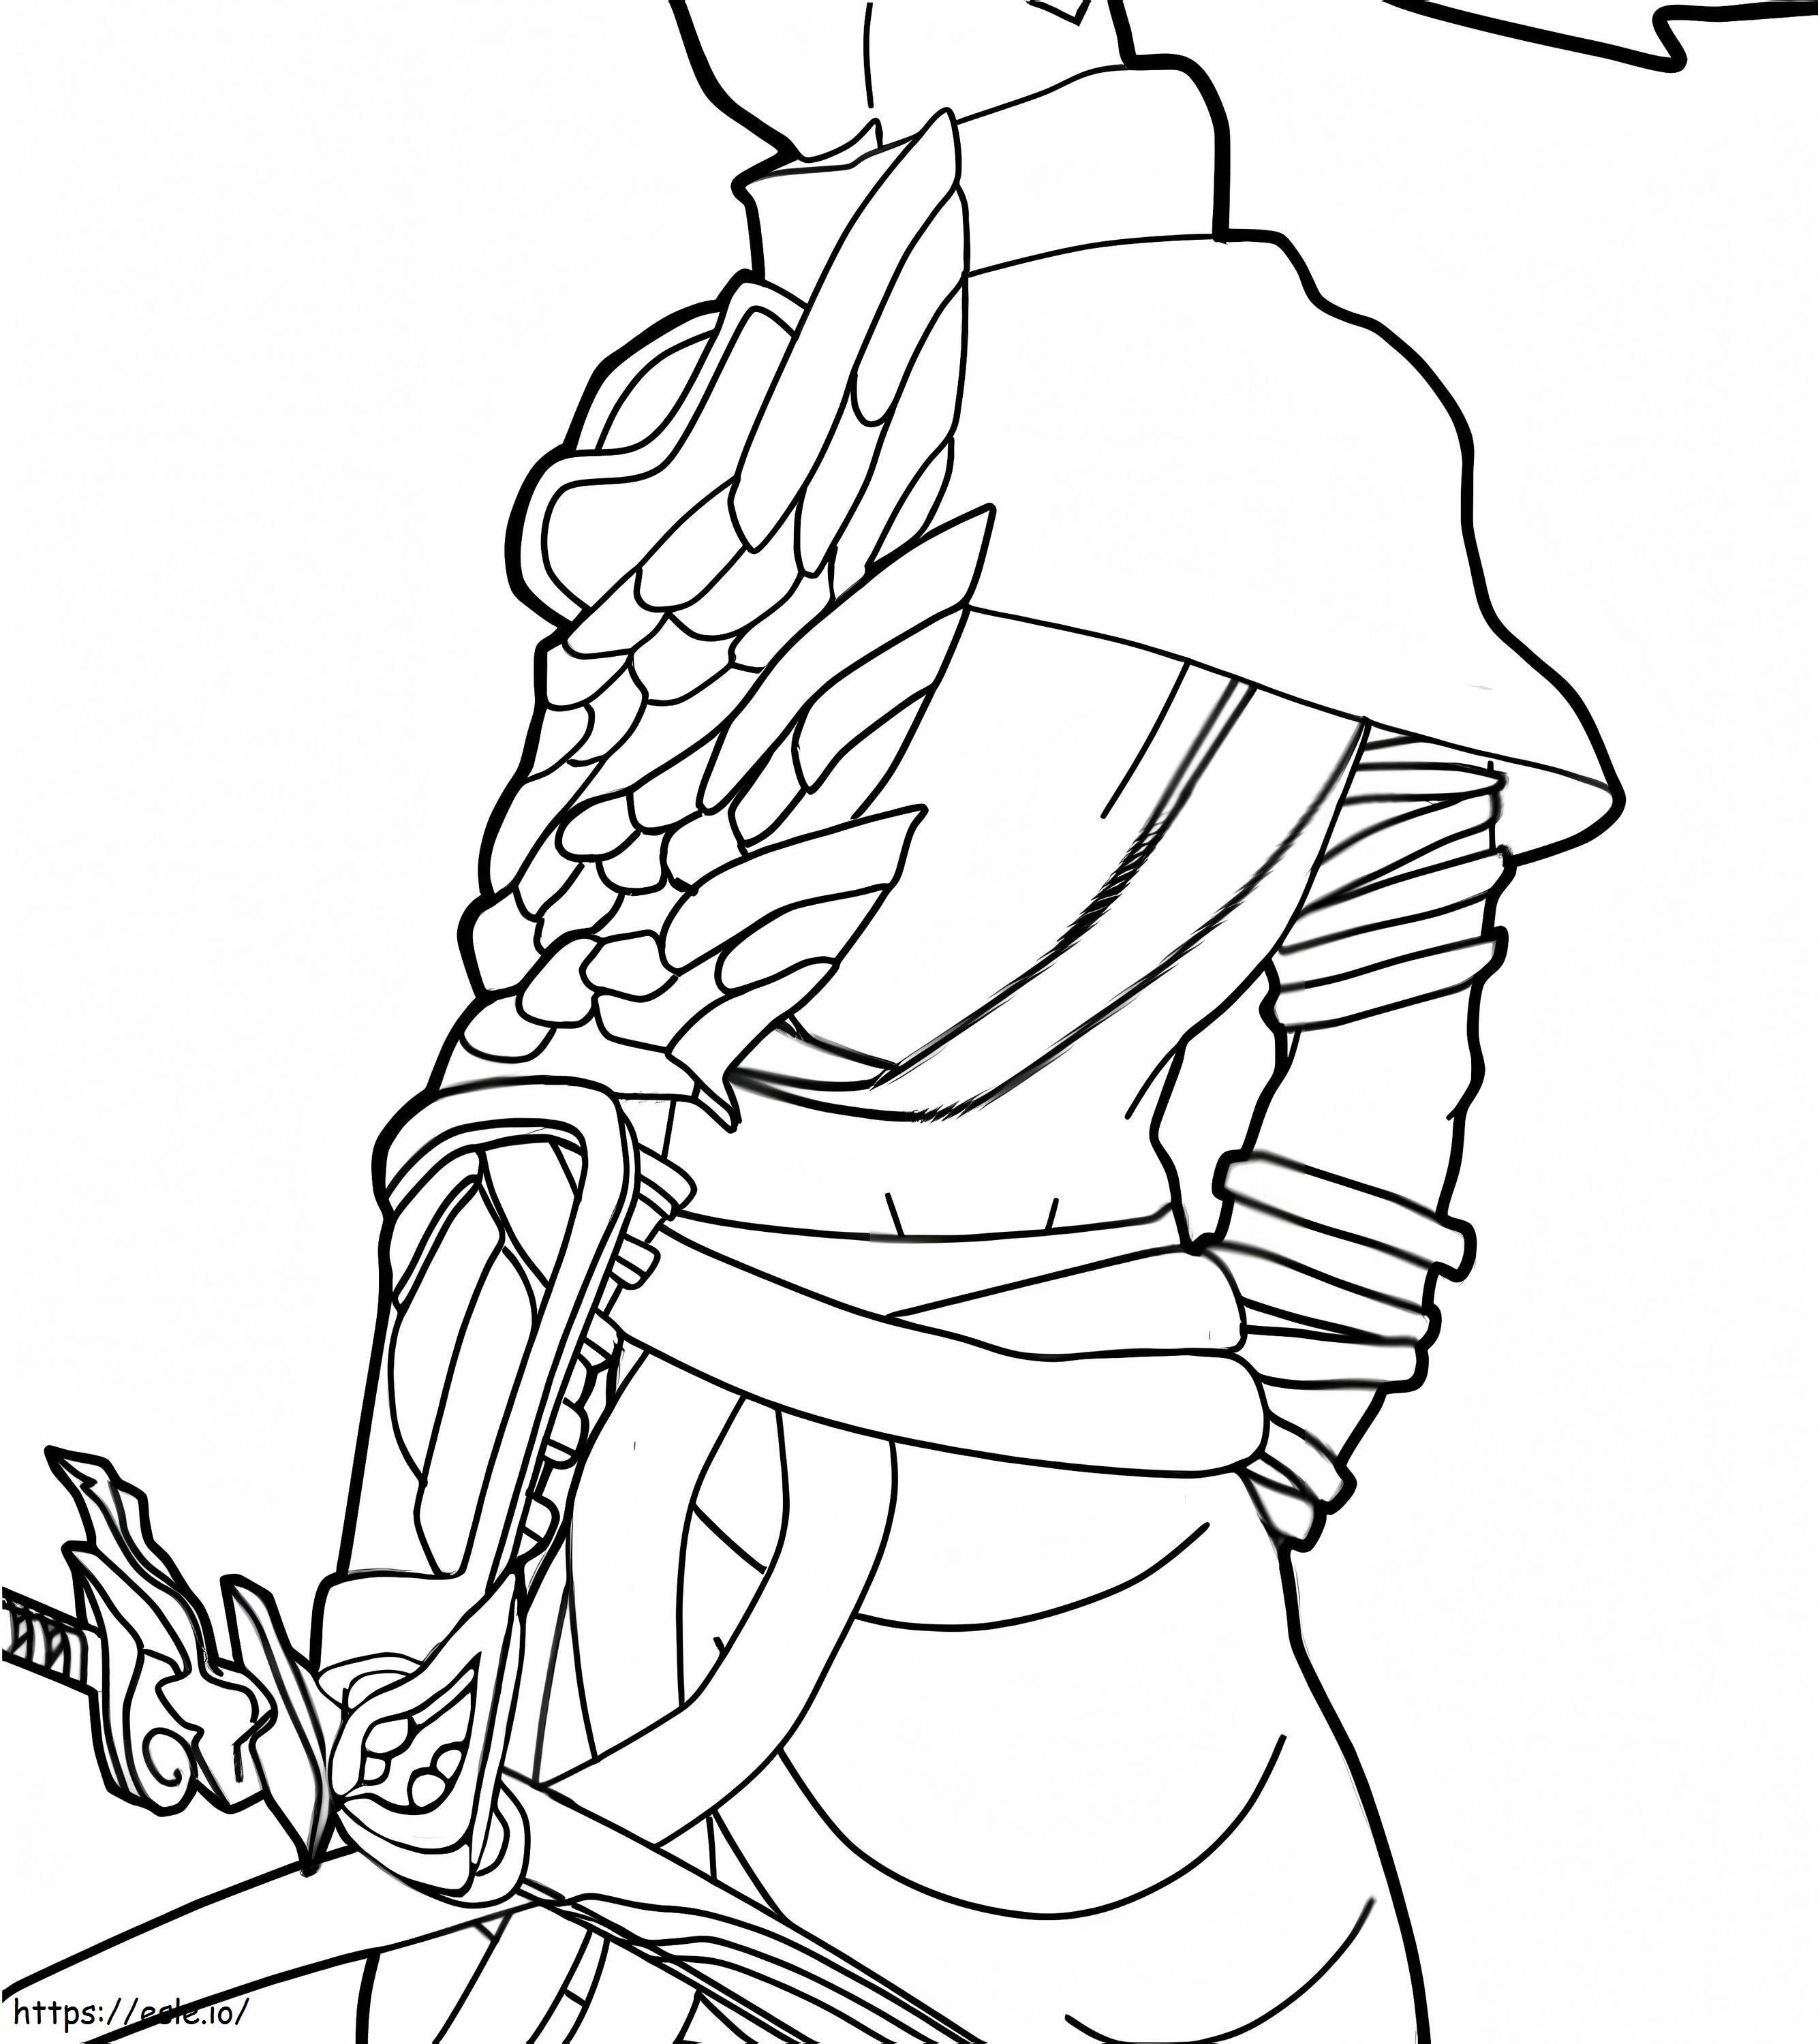 1560930726 Body Yasuo A4 coloring page